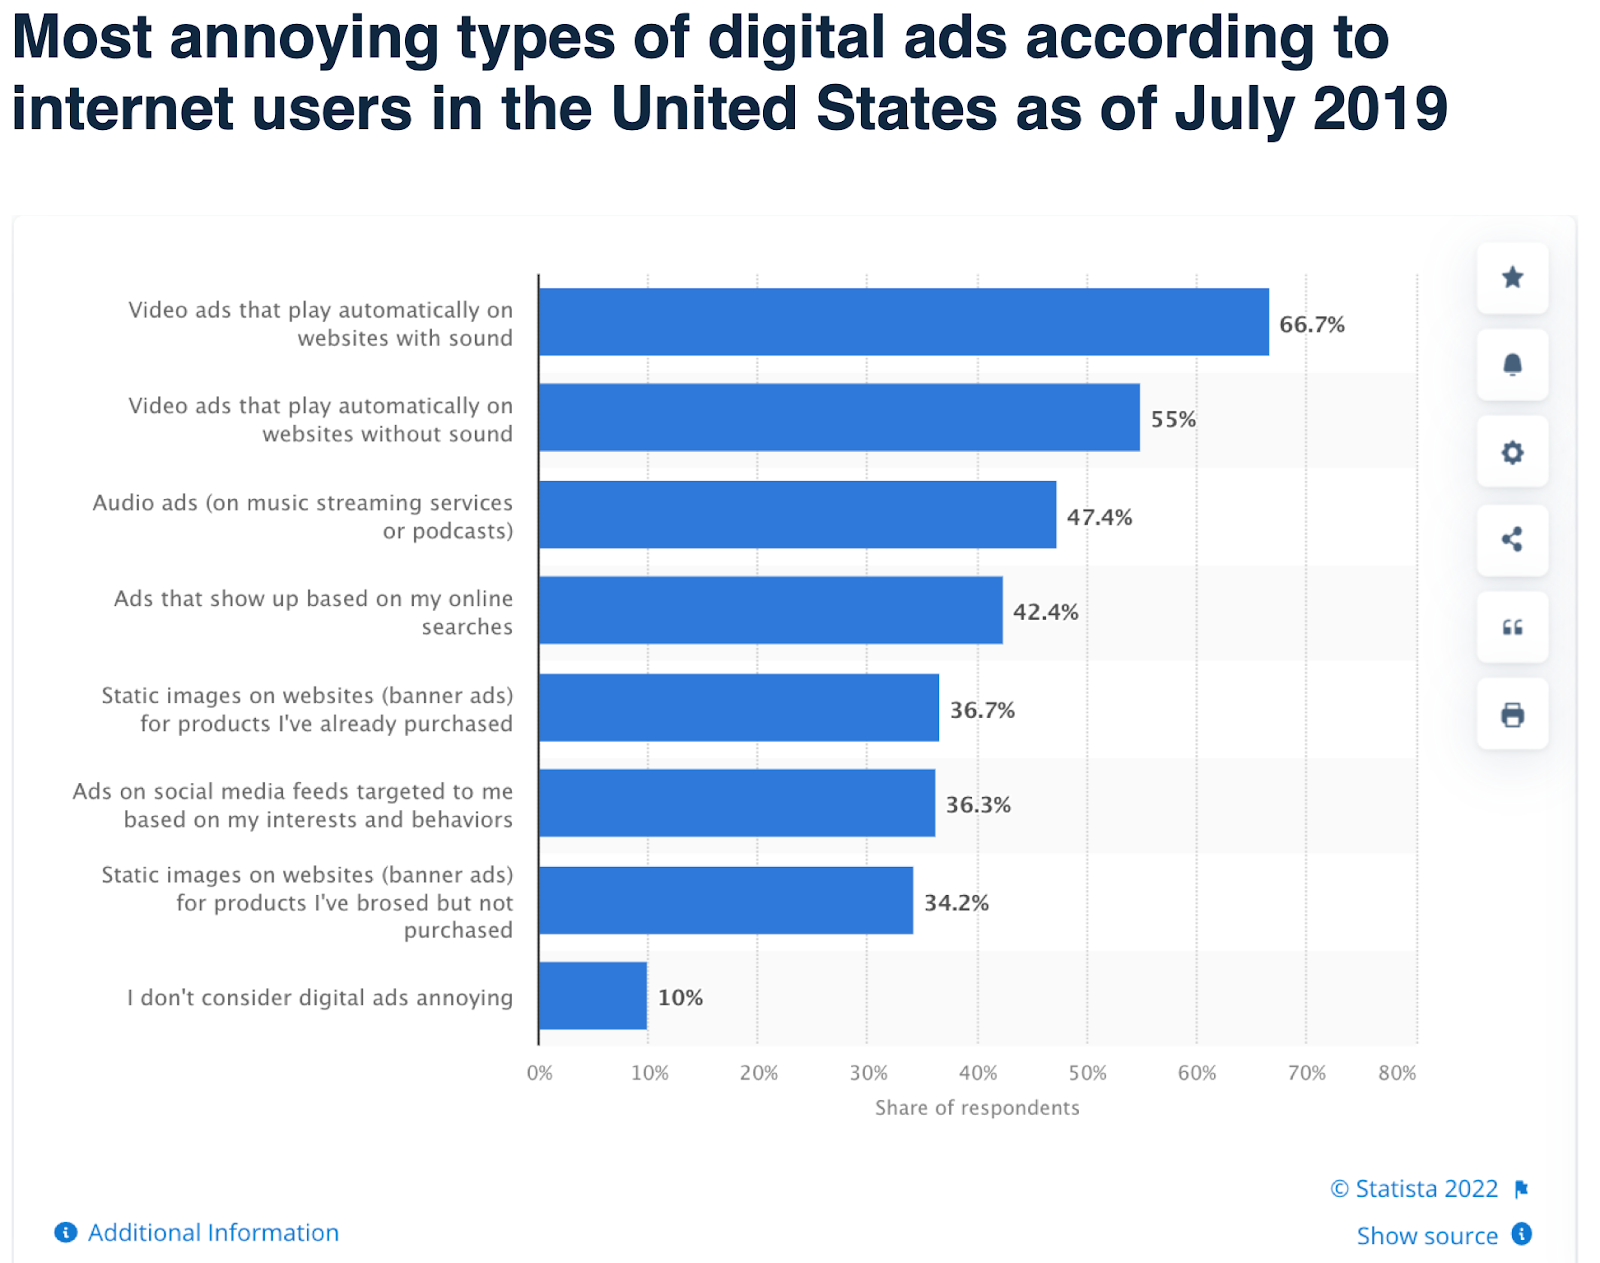 The most annoying types of digital ads according to internet users in the US.